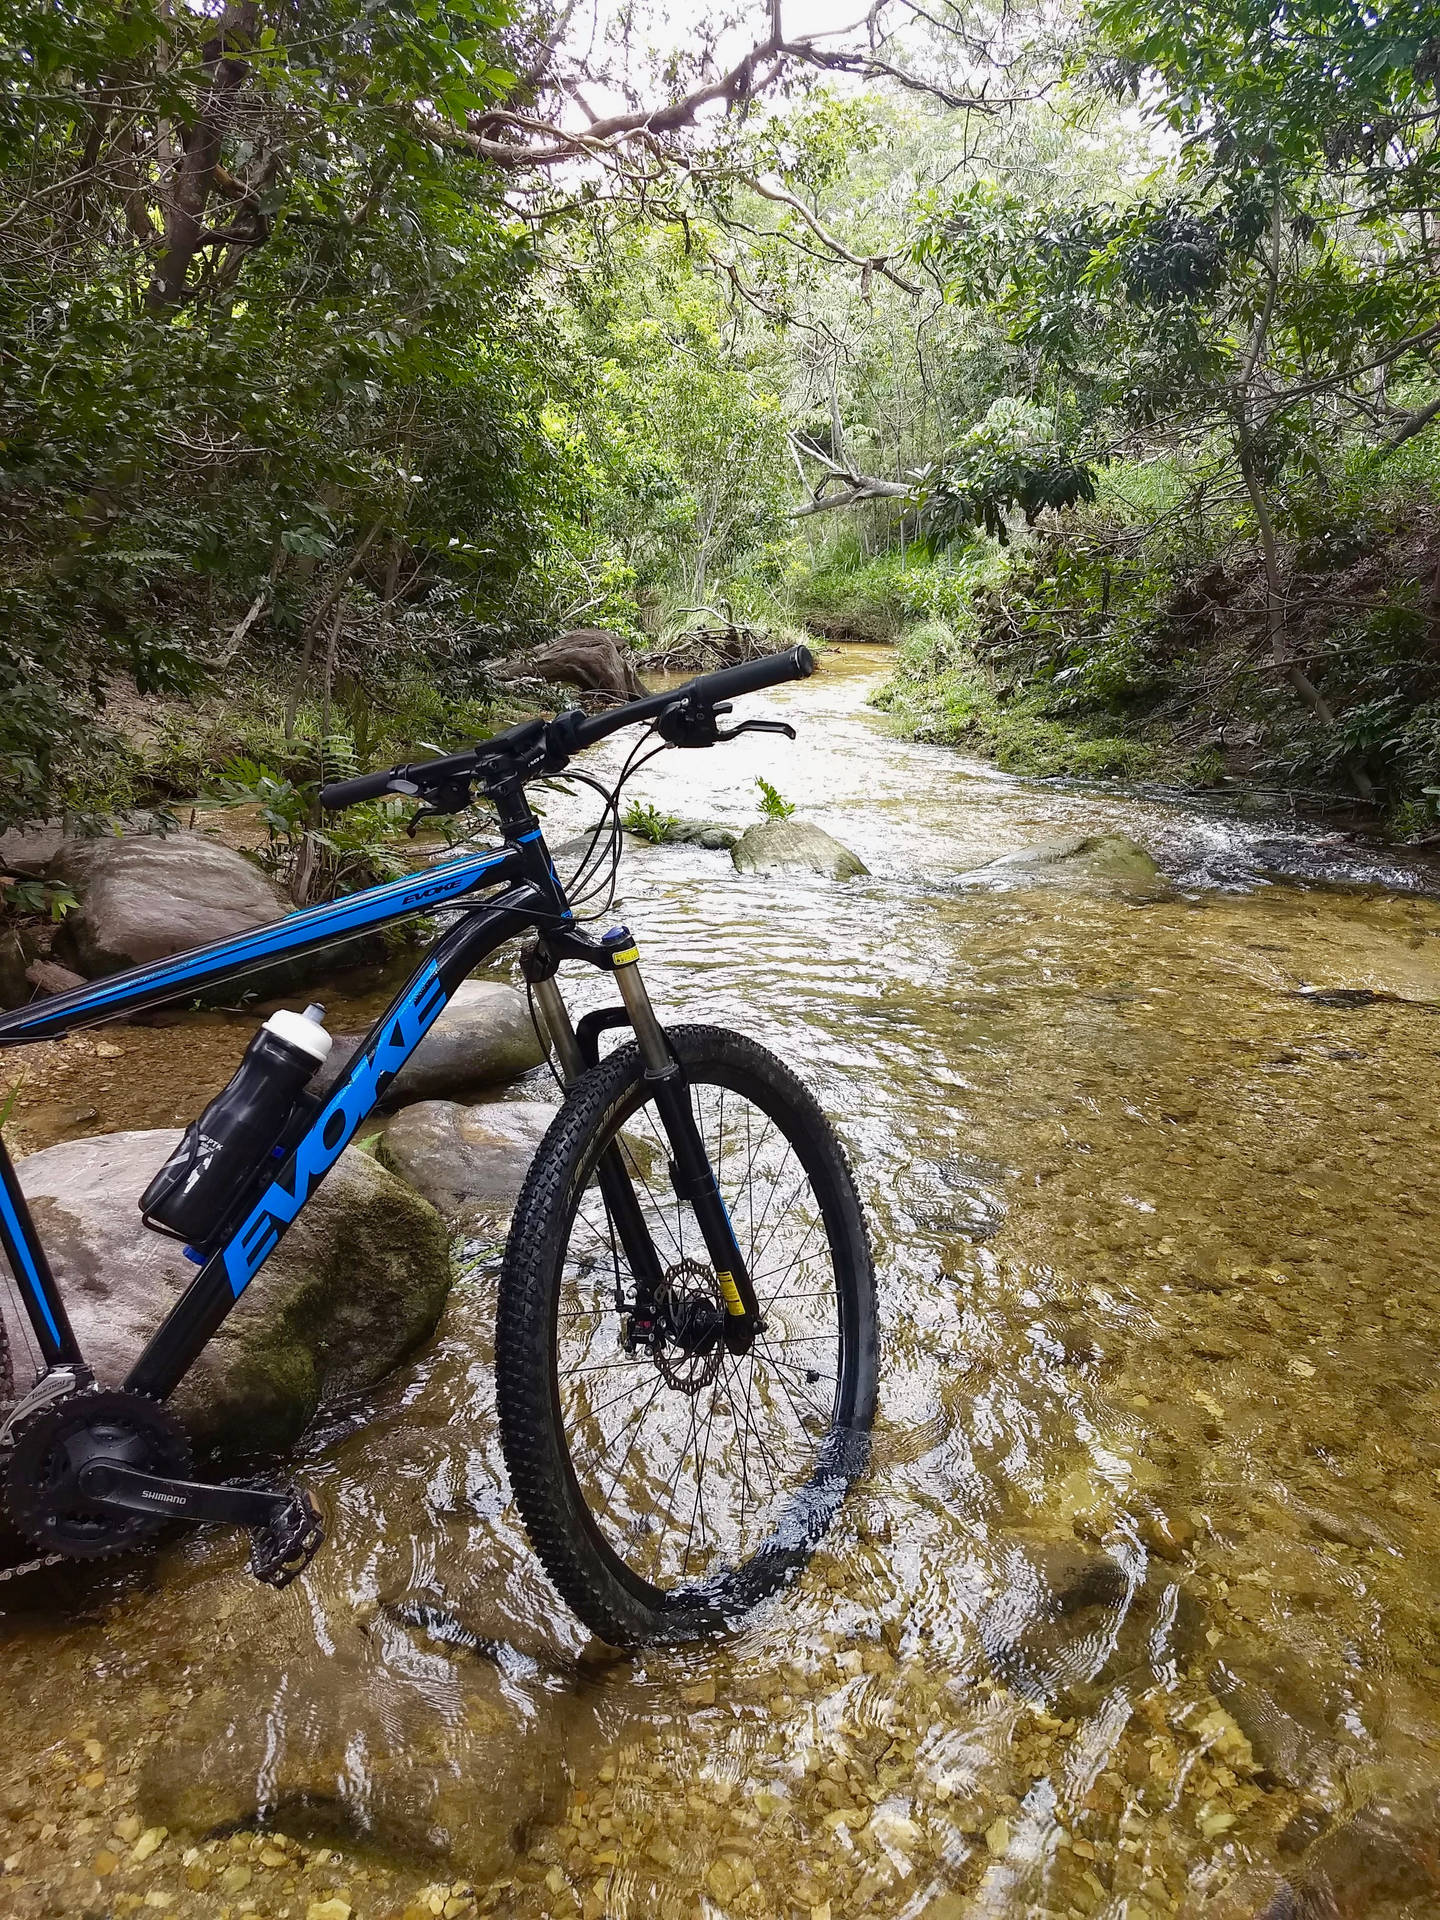 Mountain Bike 3024X4032 Wallpaper and Background Image